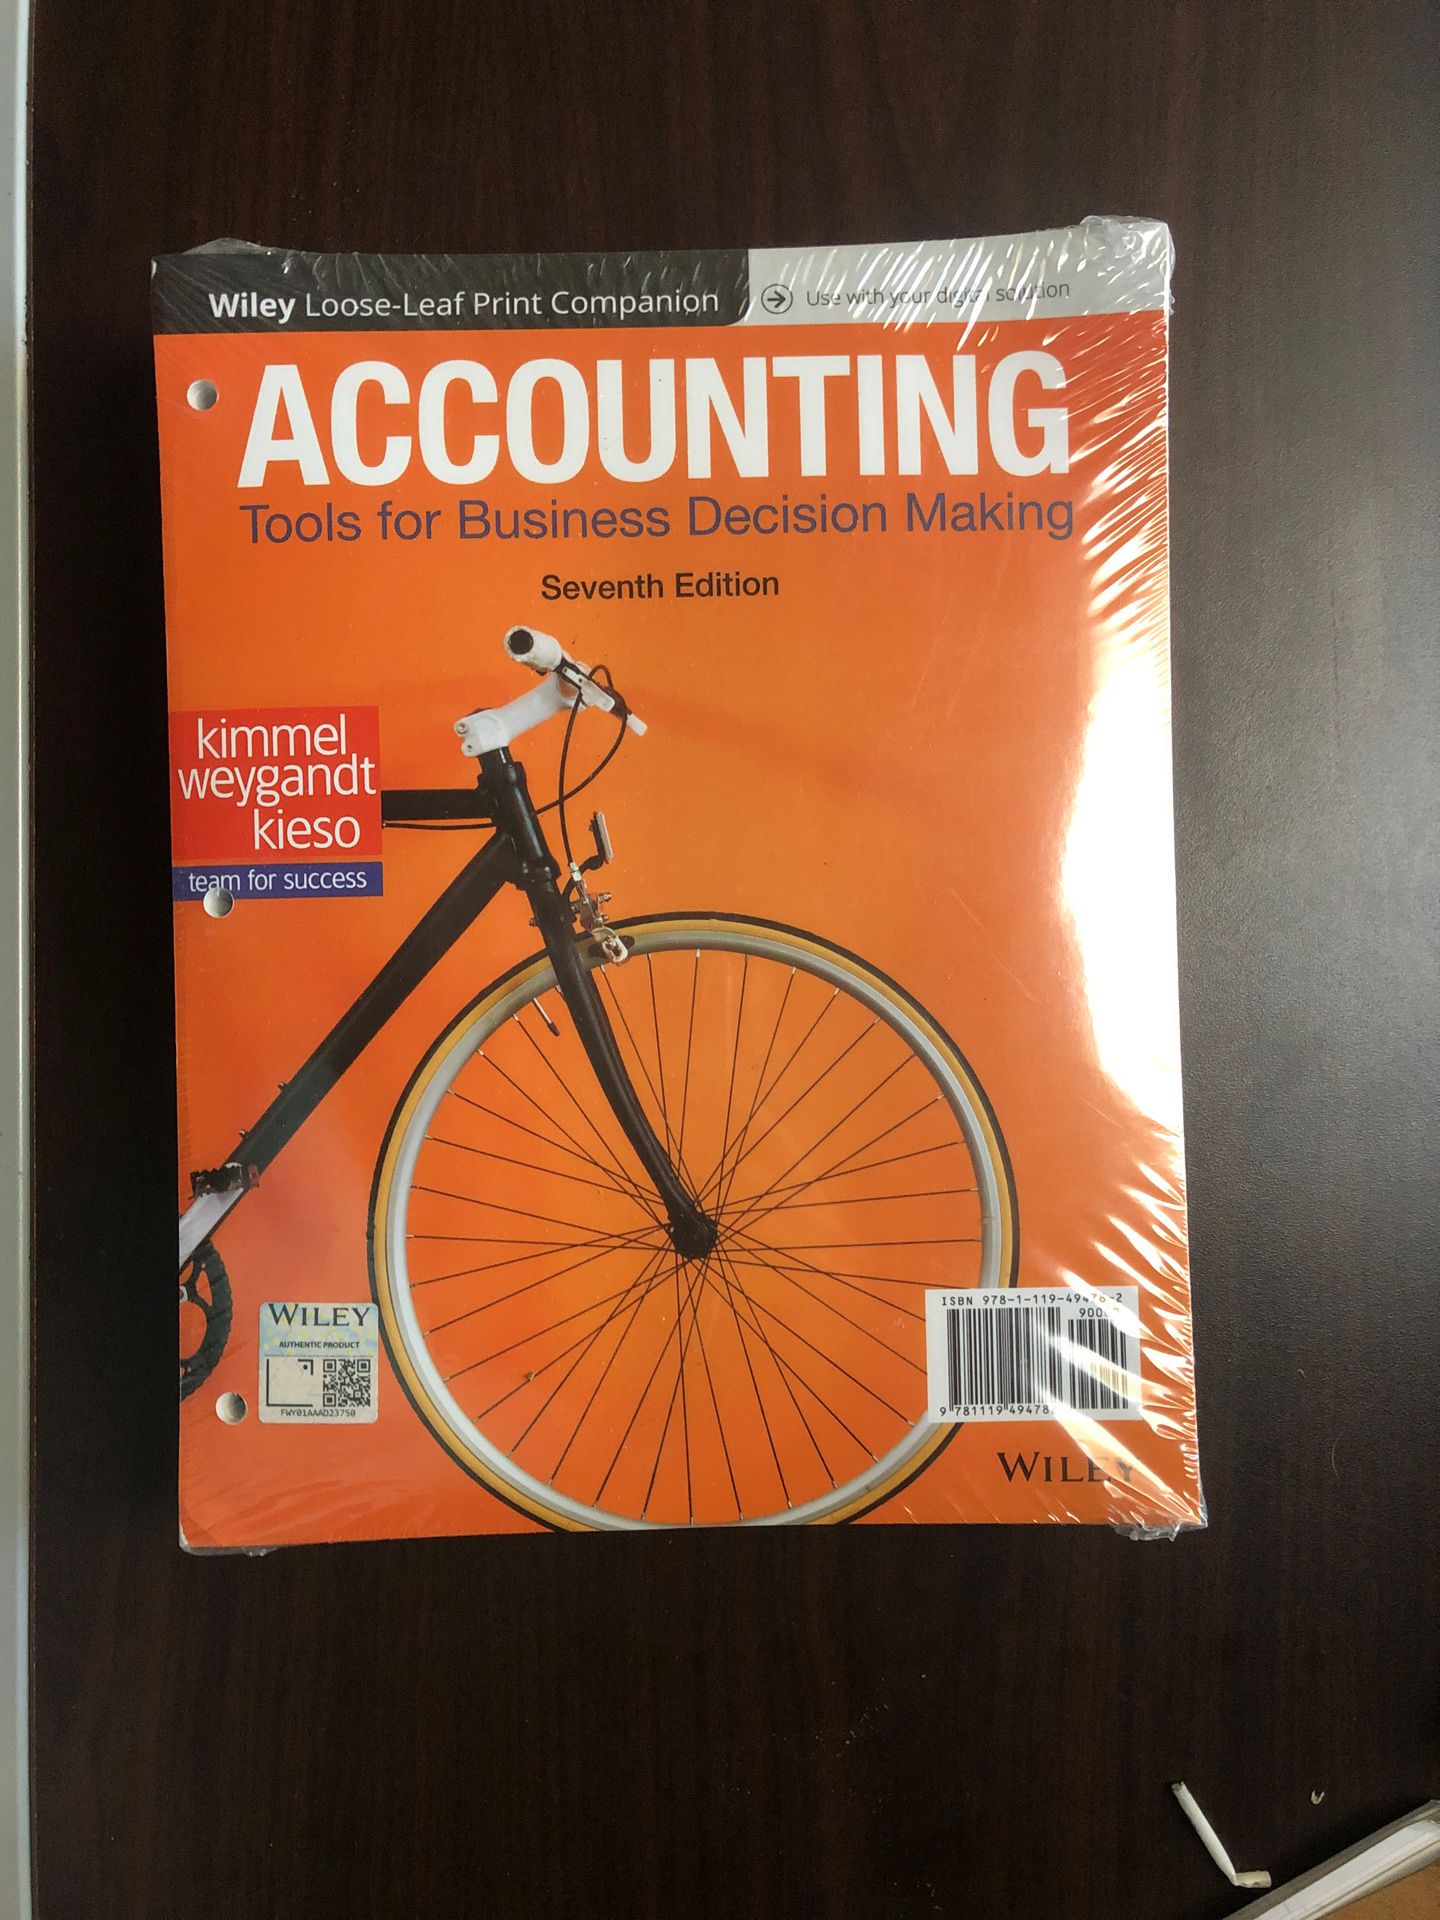 Accounting Tools for Business Decision Making 7th Edition